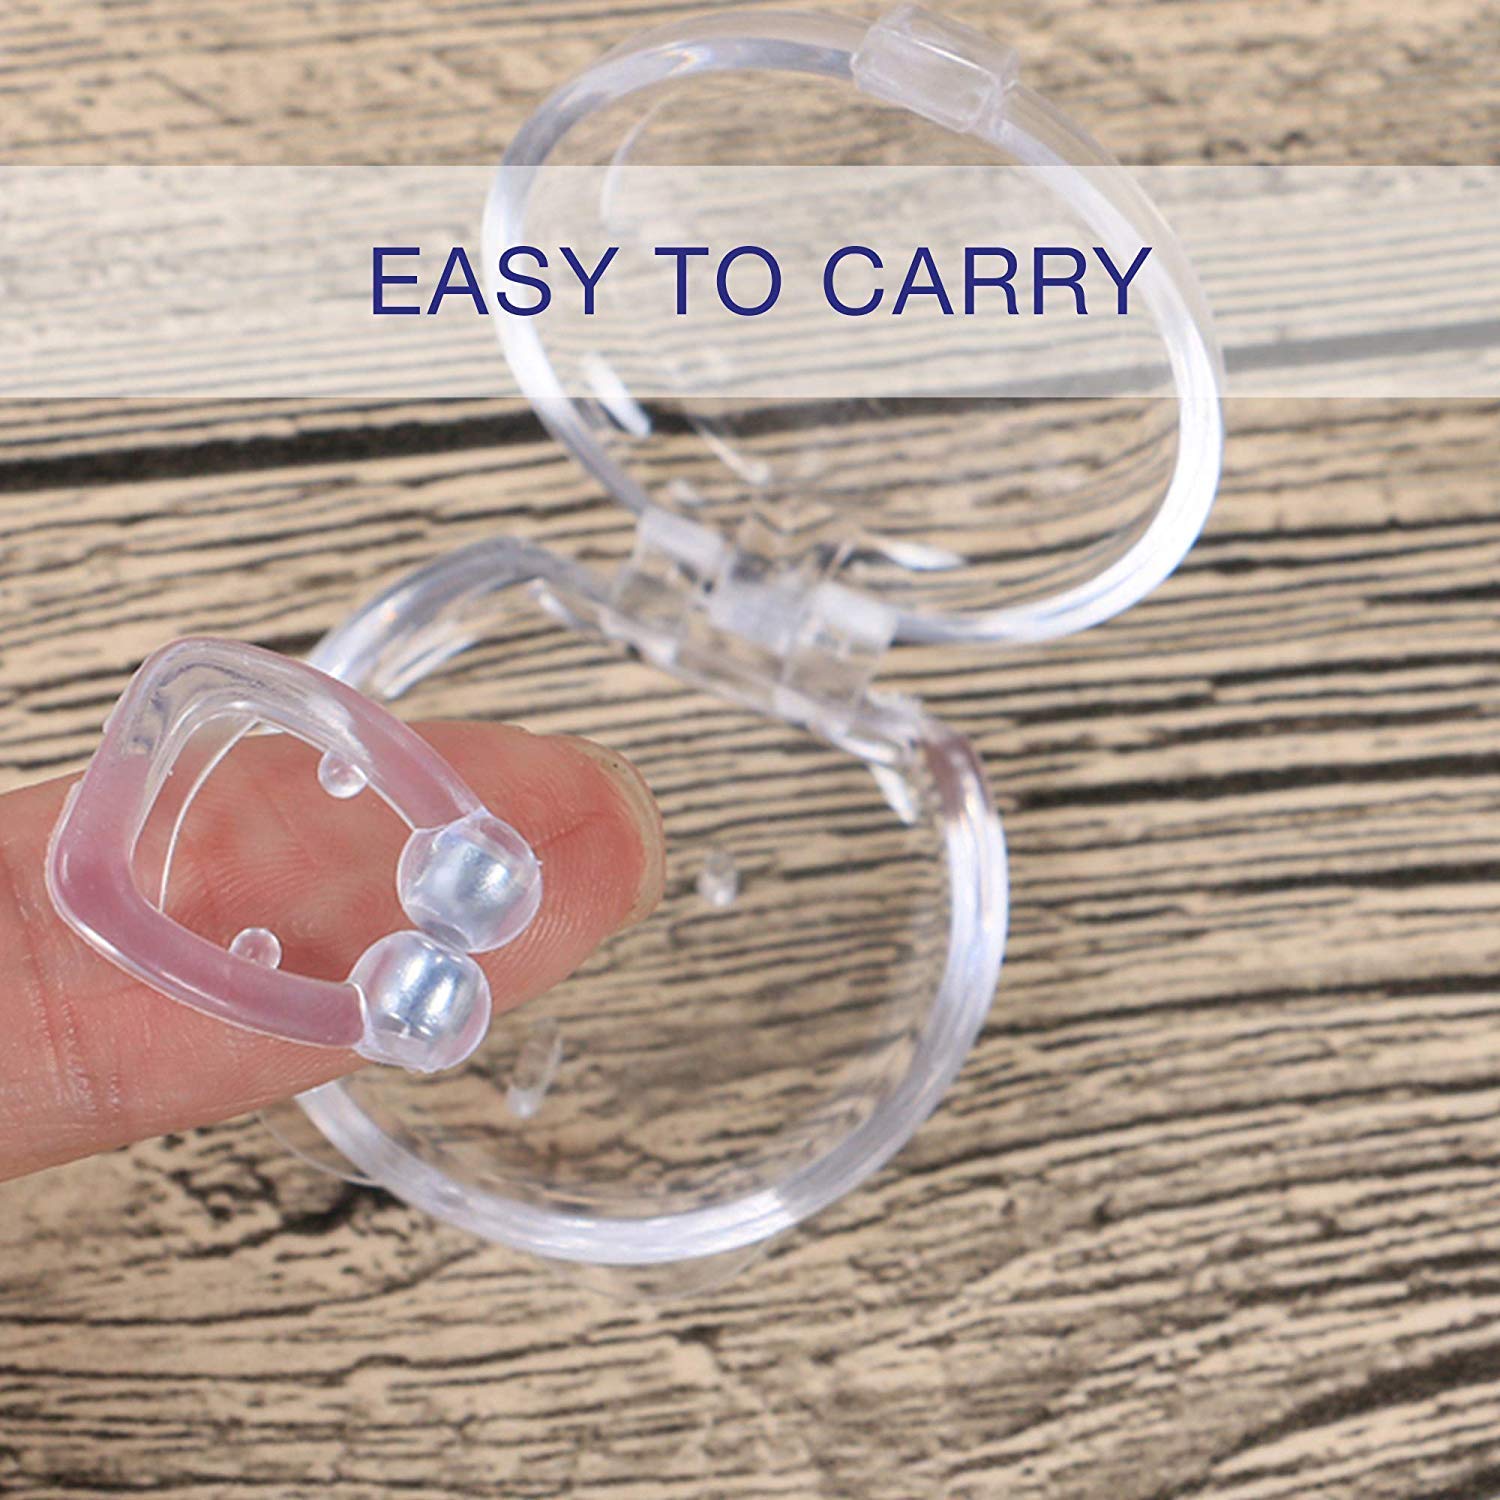 Snore Stopper Magnetic Nose Clips | 2+2 FREE